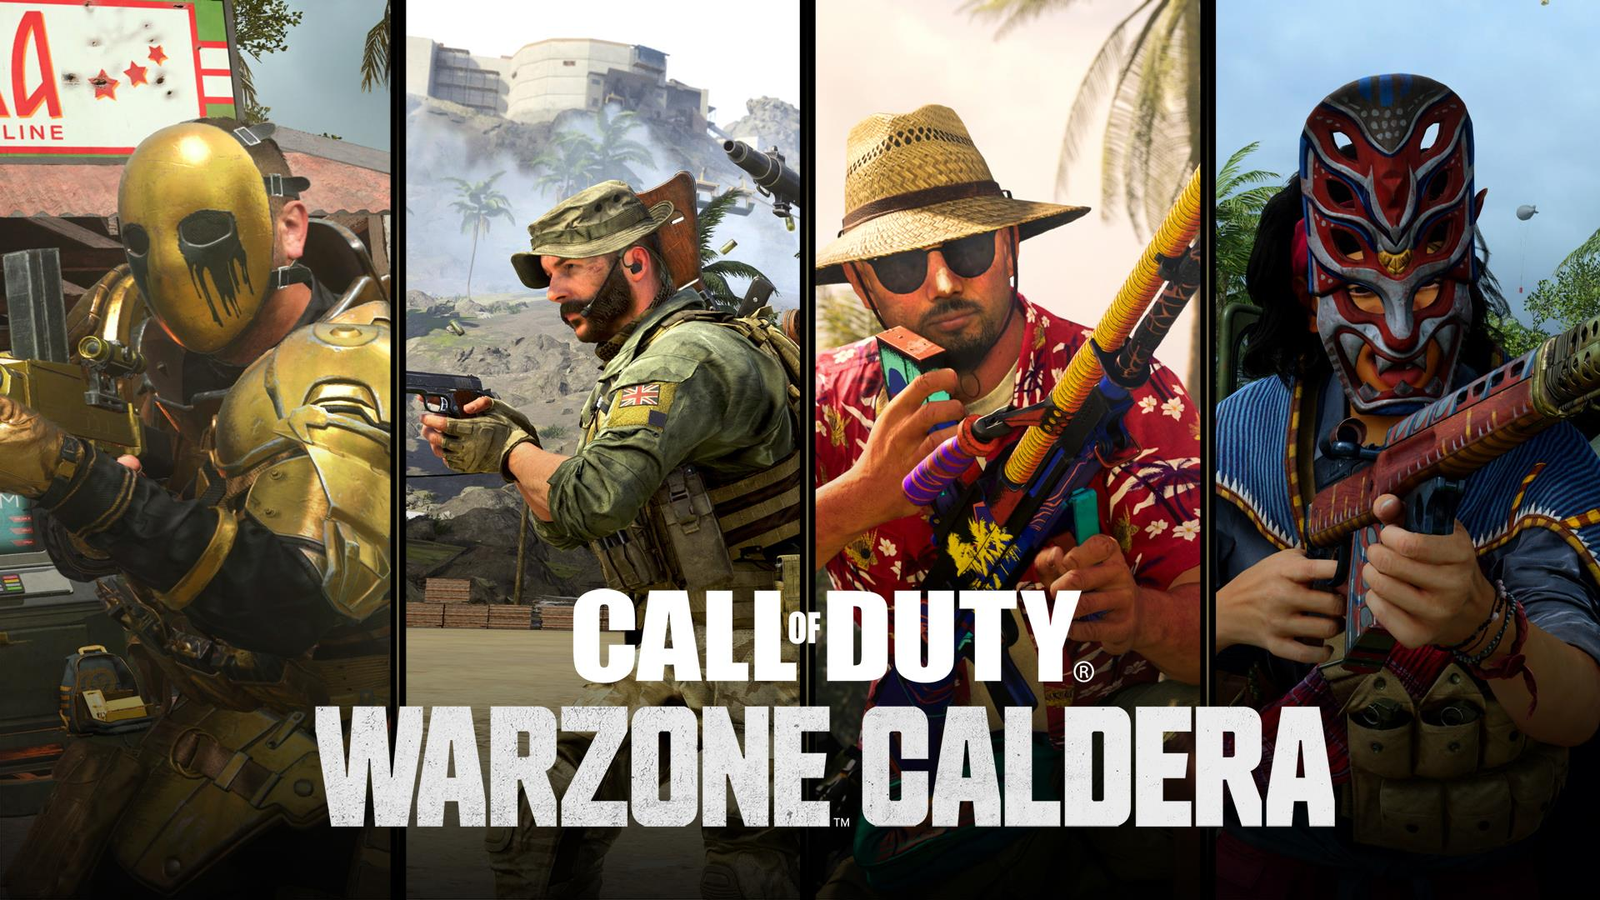 Call of Duty Warzone 2.0 finally has a release date